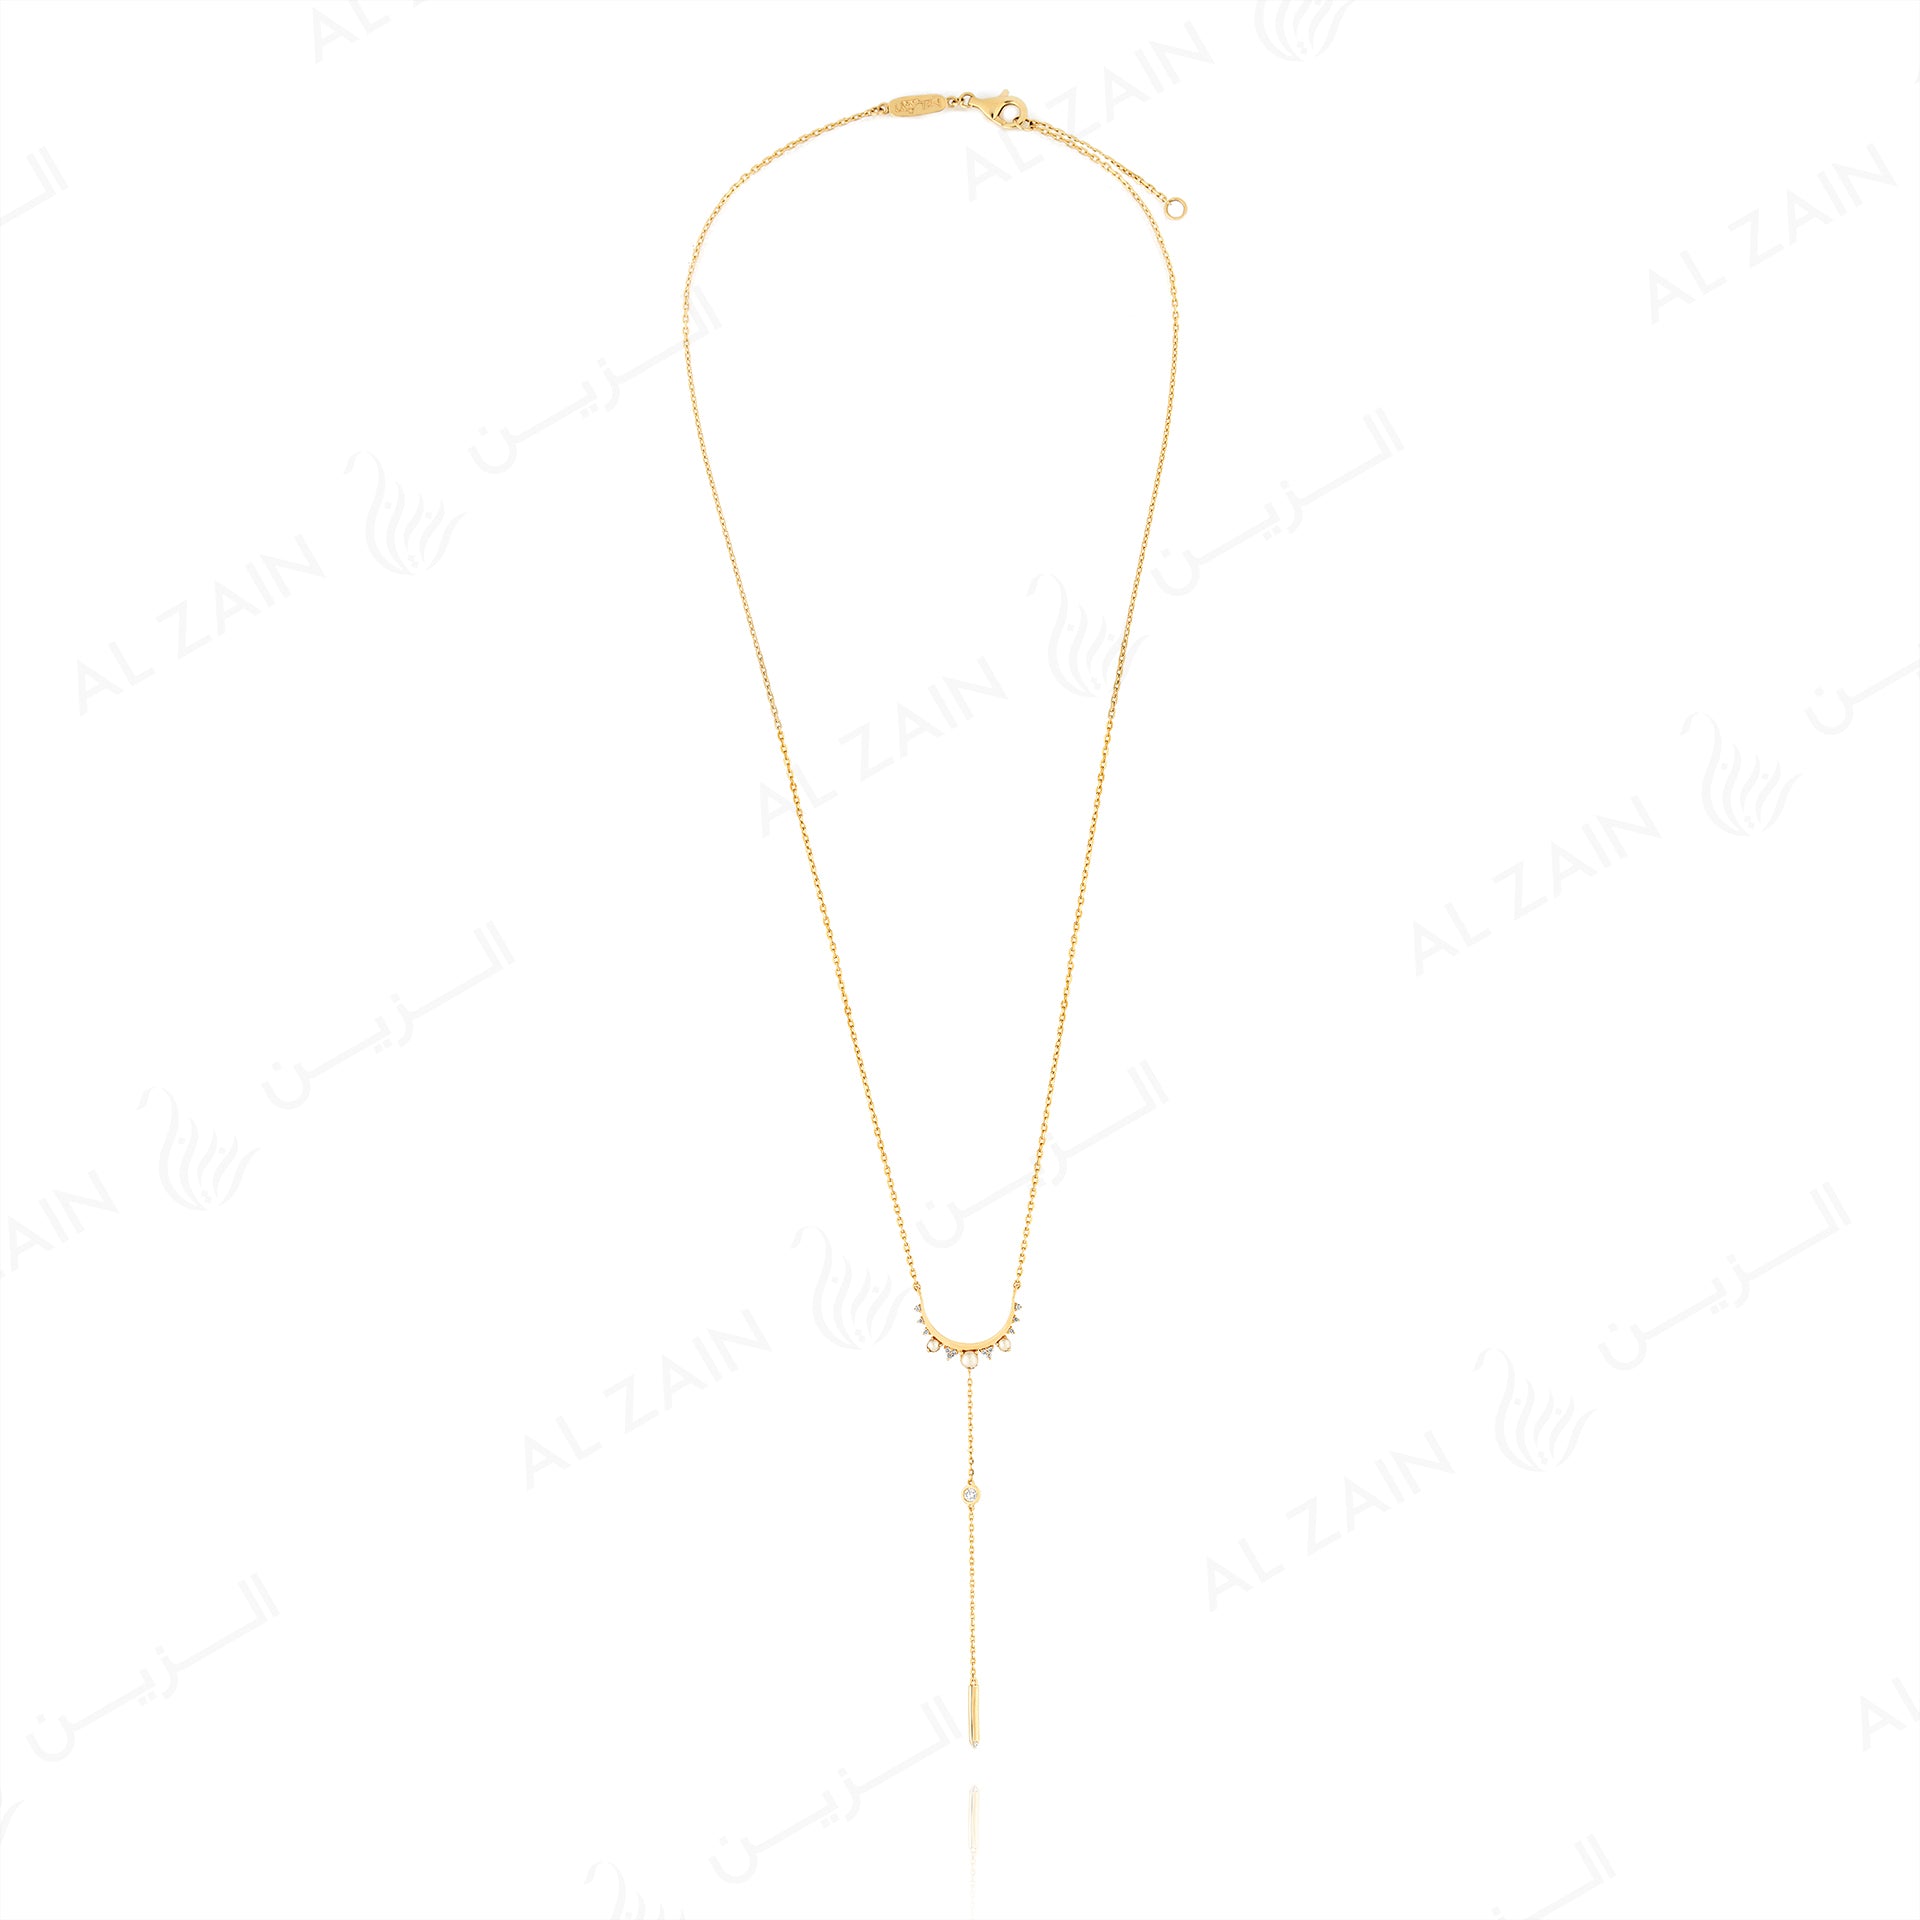 Melati "Eclipse" necklace in Yellow Gold with Diamonds and Pearls